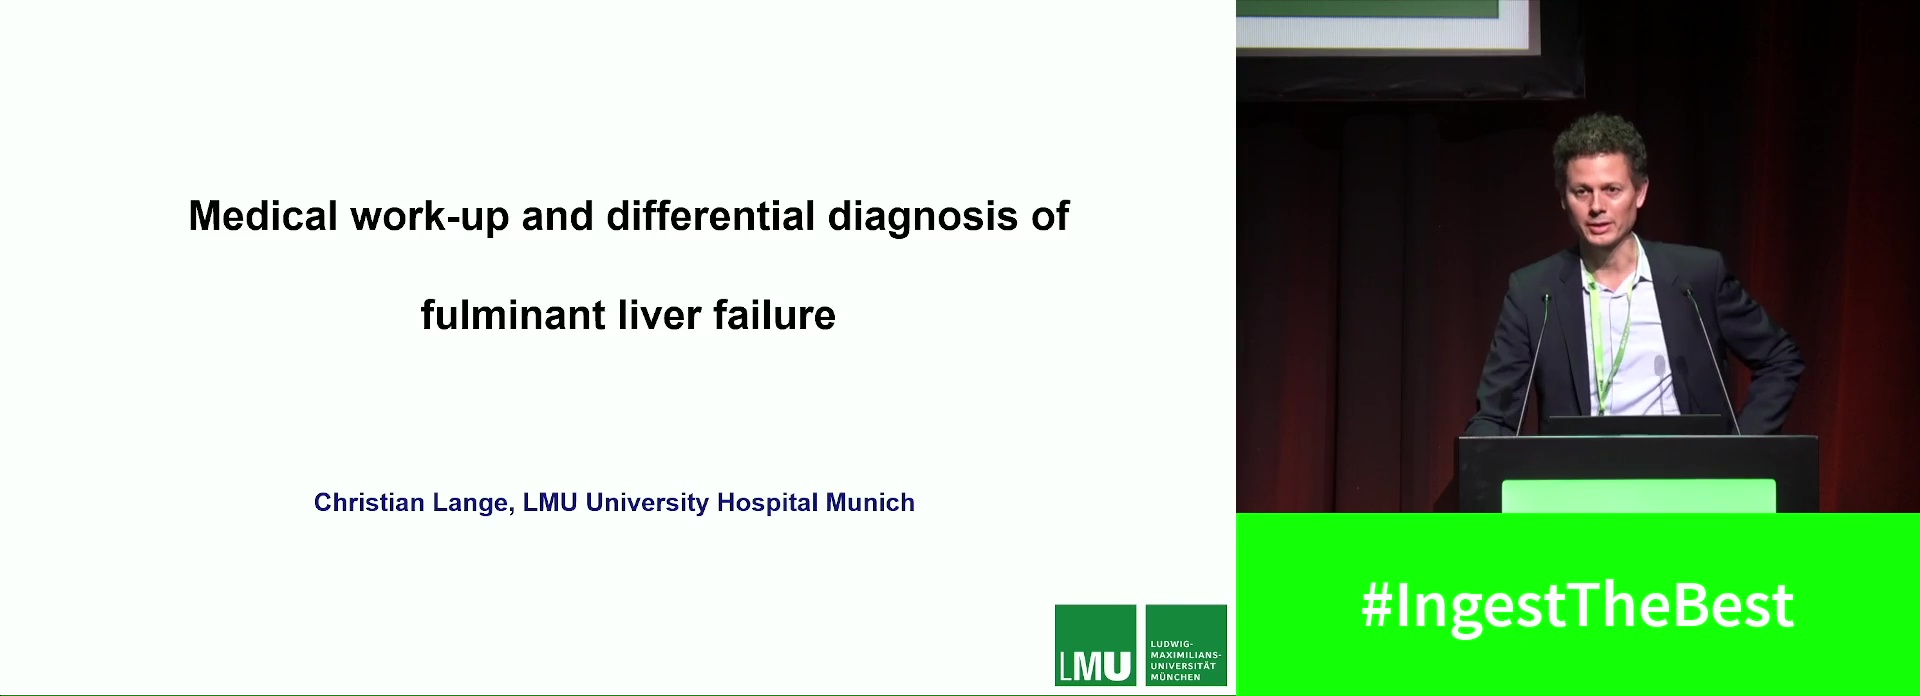 Medical work-up and differential diagnosis of fulminant liver failure